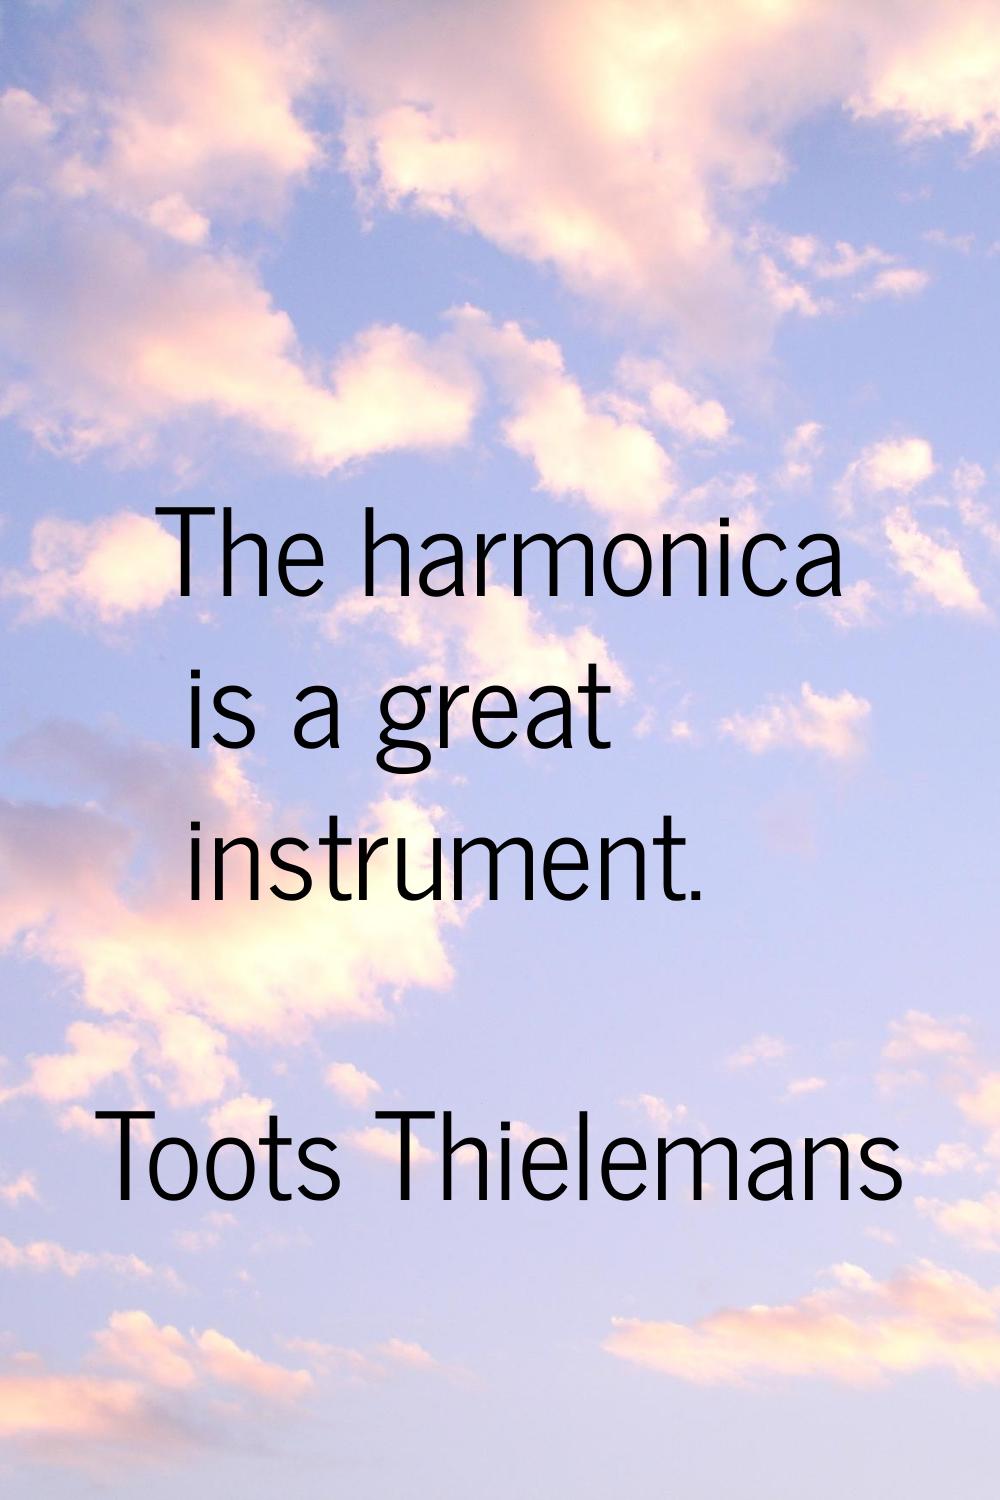 The harmonica is a great instrument.